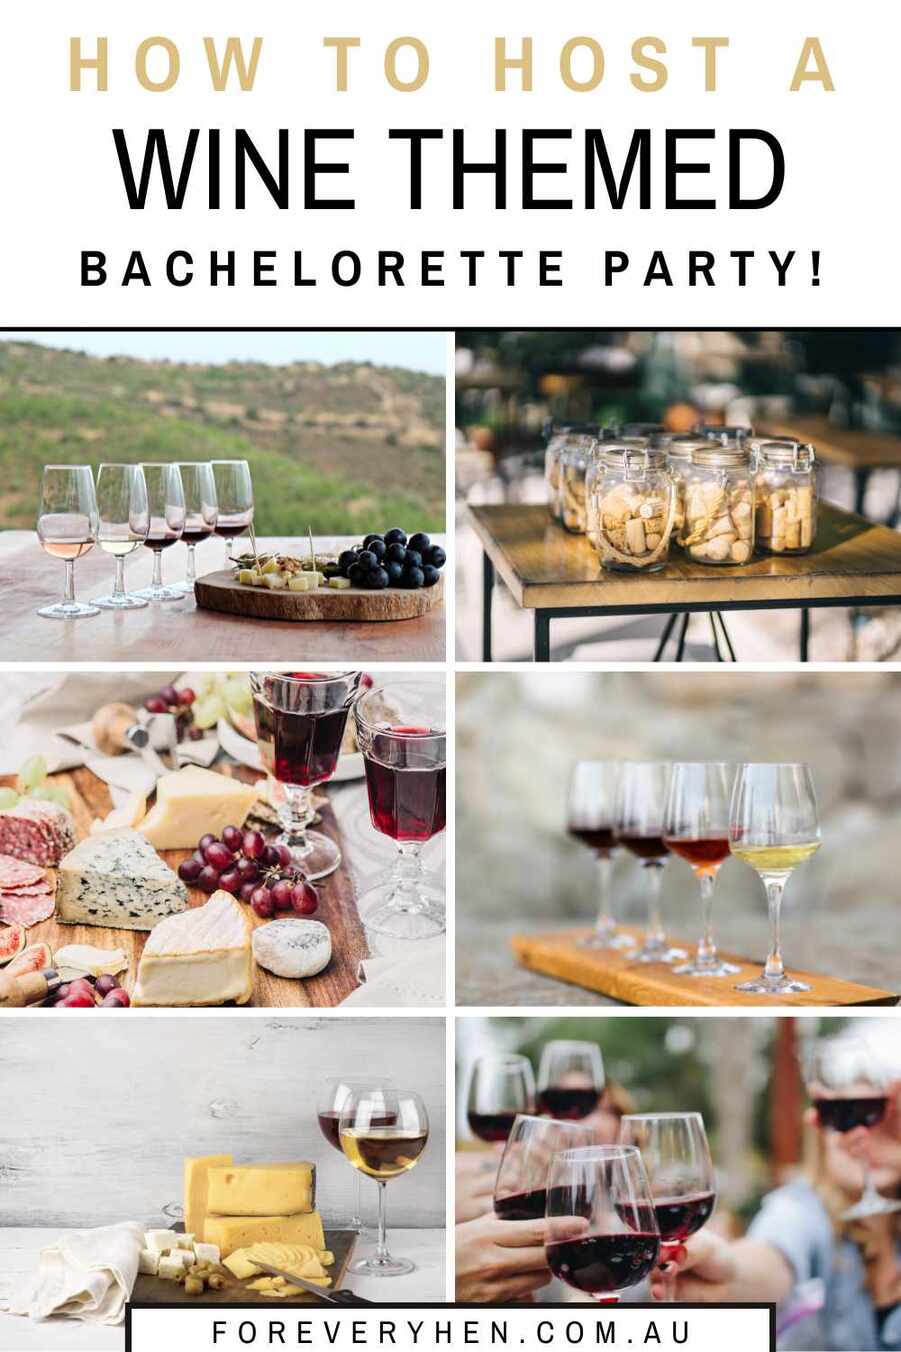 Collage of wine images (some featuring food, some featuring corks). Text ovleray: How to host a wine themed bachelorette party